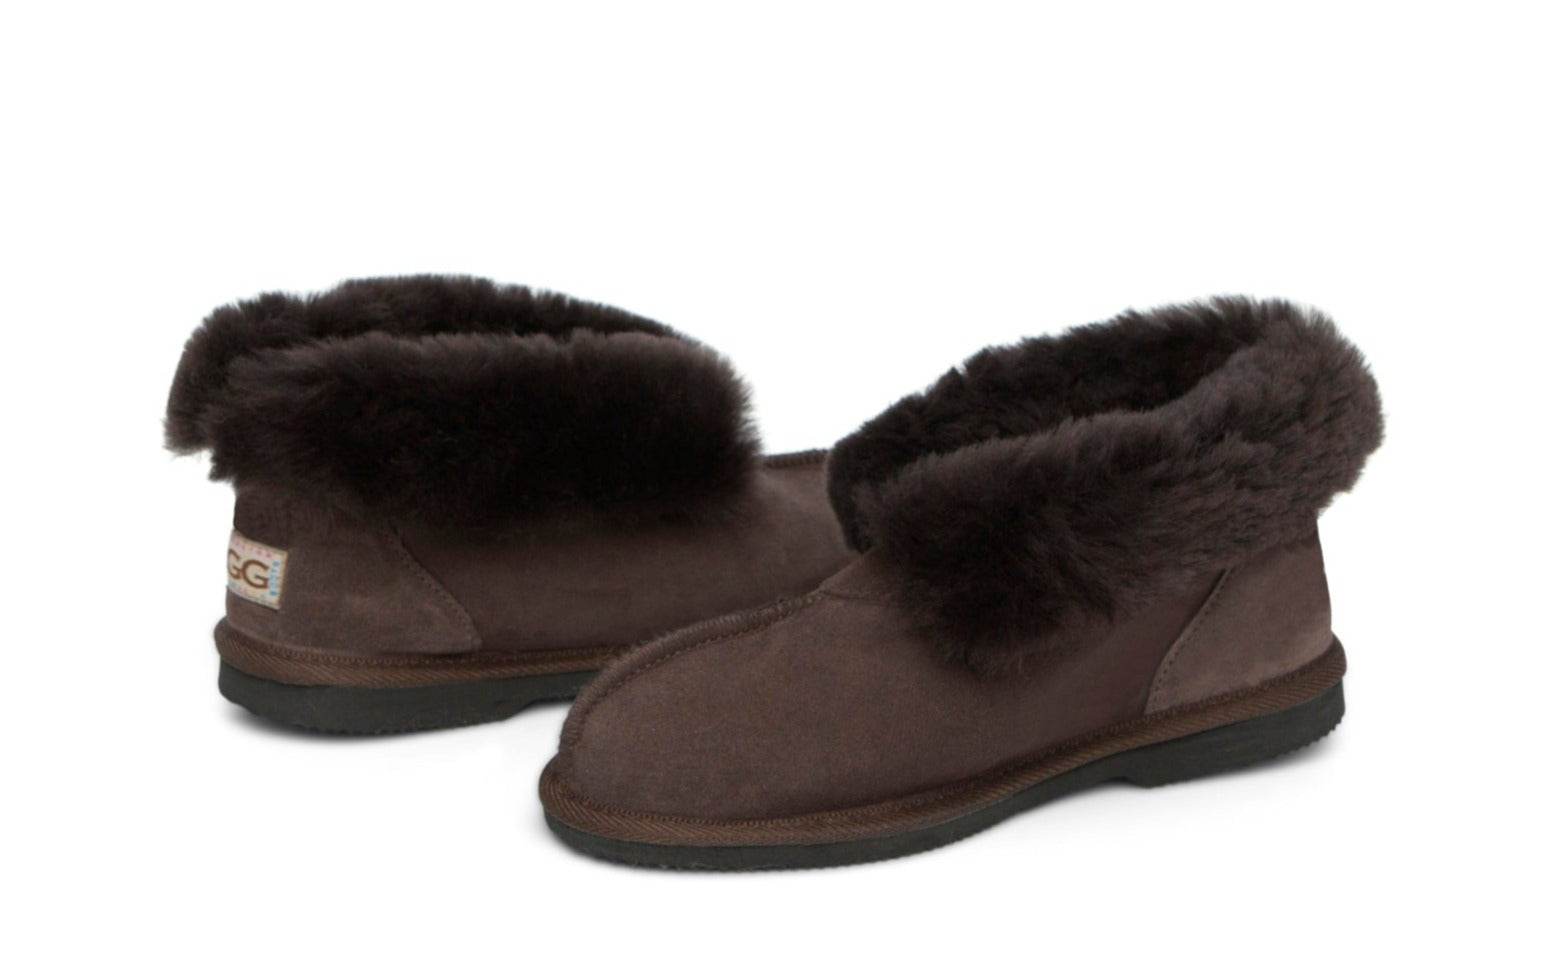 Kid's Ugg Slippers, with sheepskin rolled out at the top in chocolate